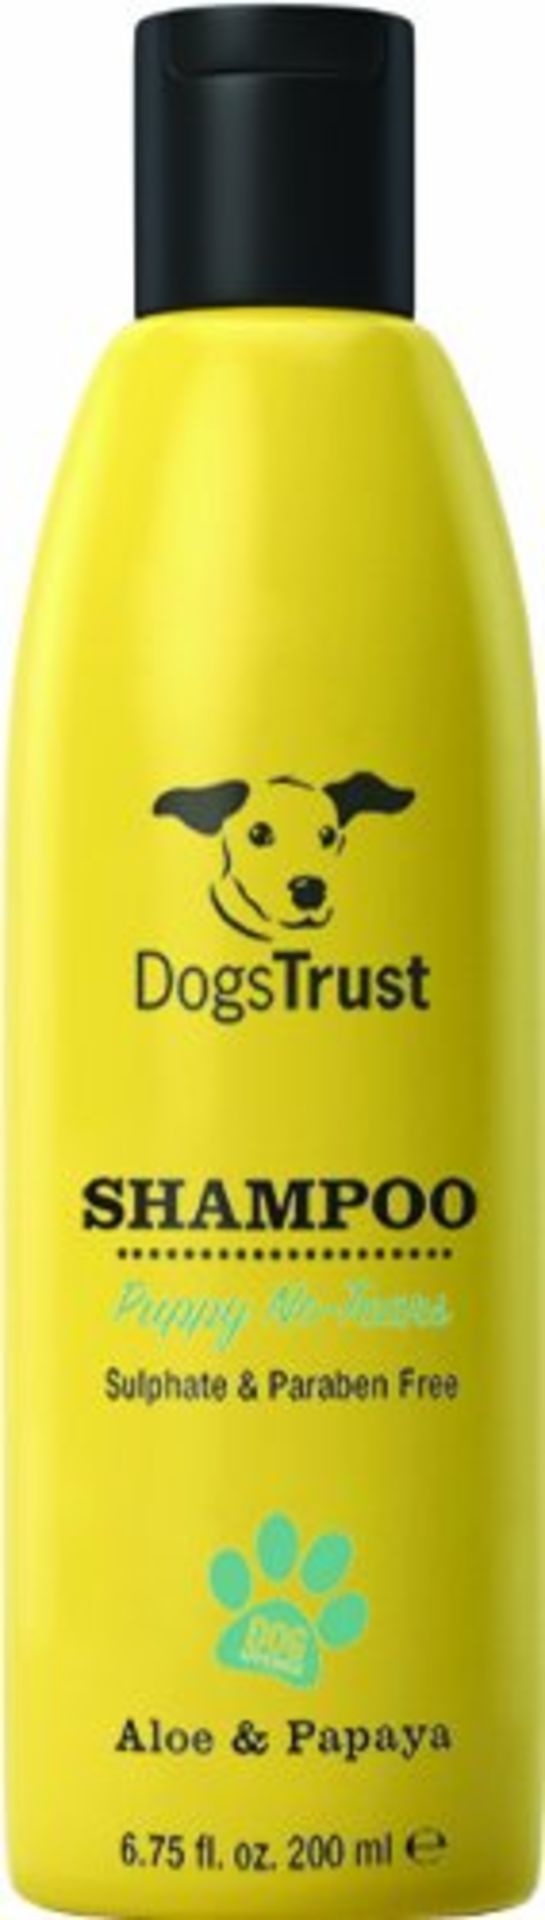 60 x Various Dogs Trust Shampoos and Conditioners - Brand New Stock - CL028 - Includes No Tears, - Image 10 of 16